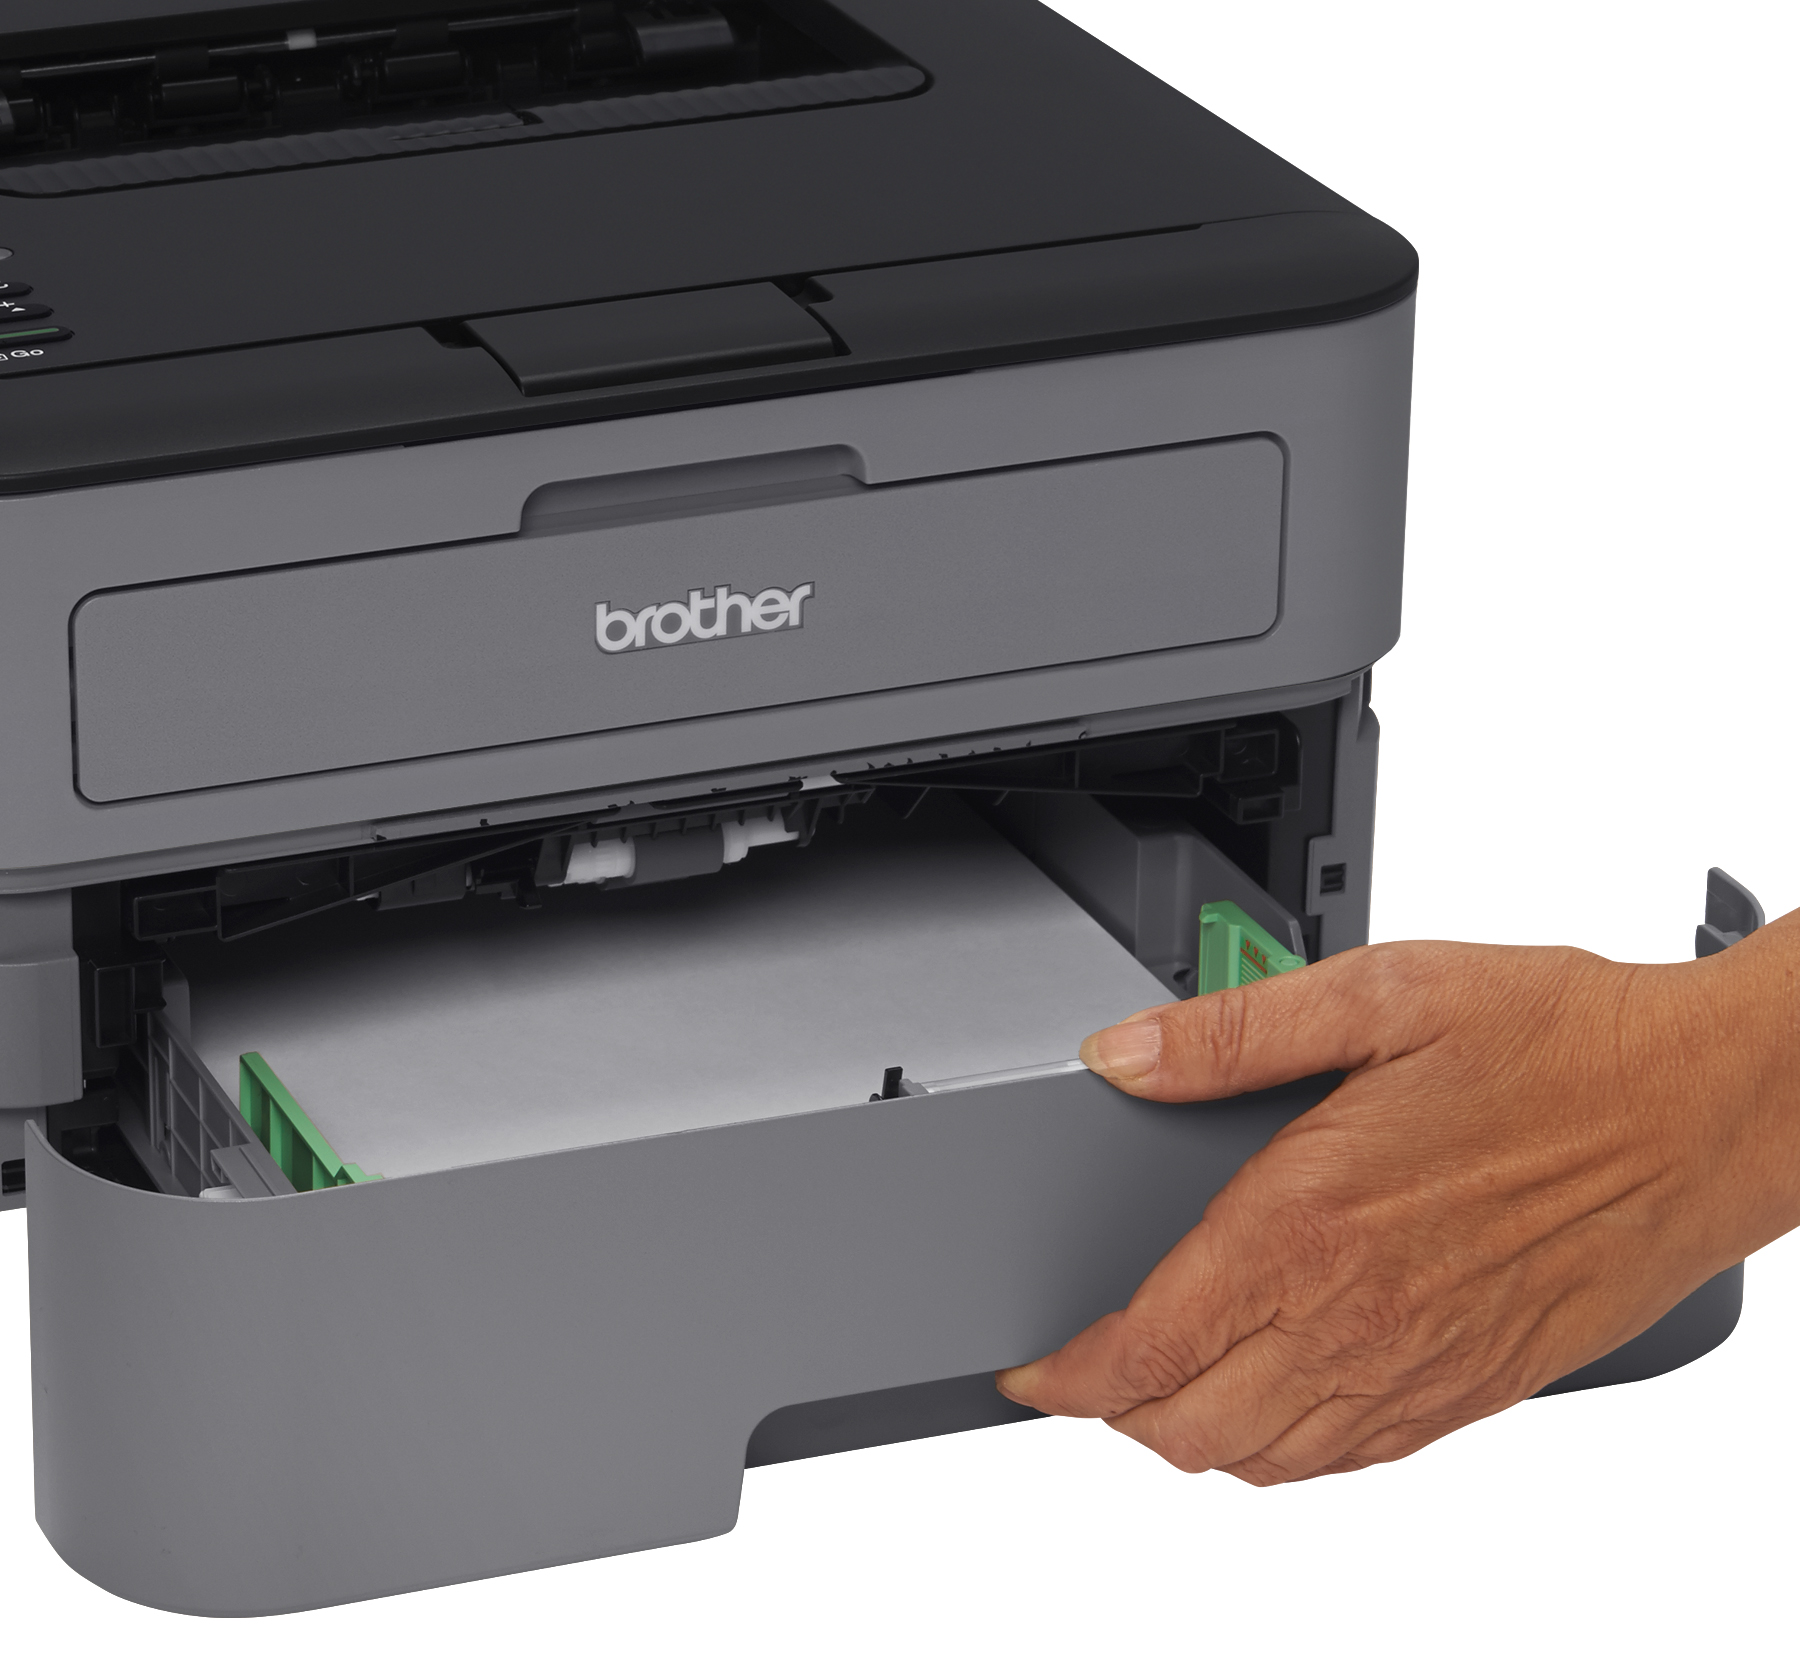 Brother Compact Monochrome Laser Printer, HL-L2315DW, Wireless Printing, Duplex Two-Sided Printing - image 3 of 6